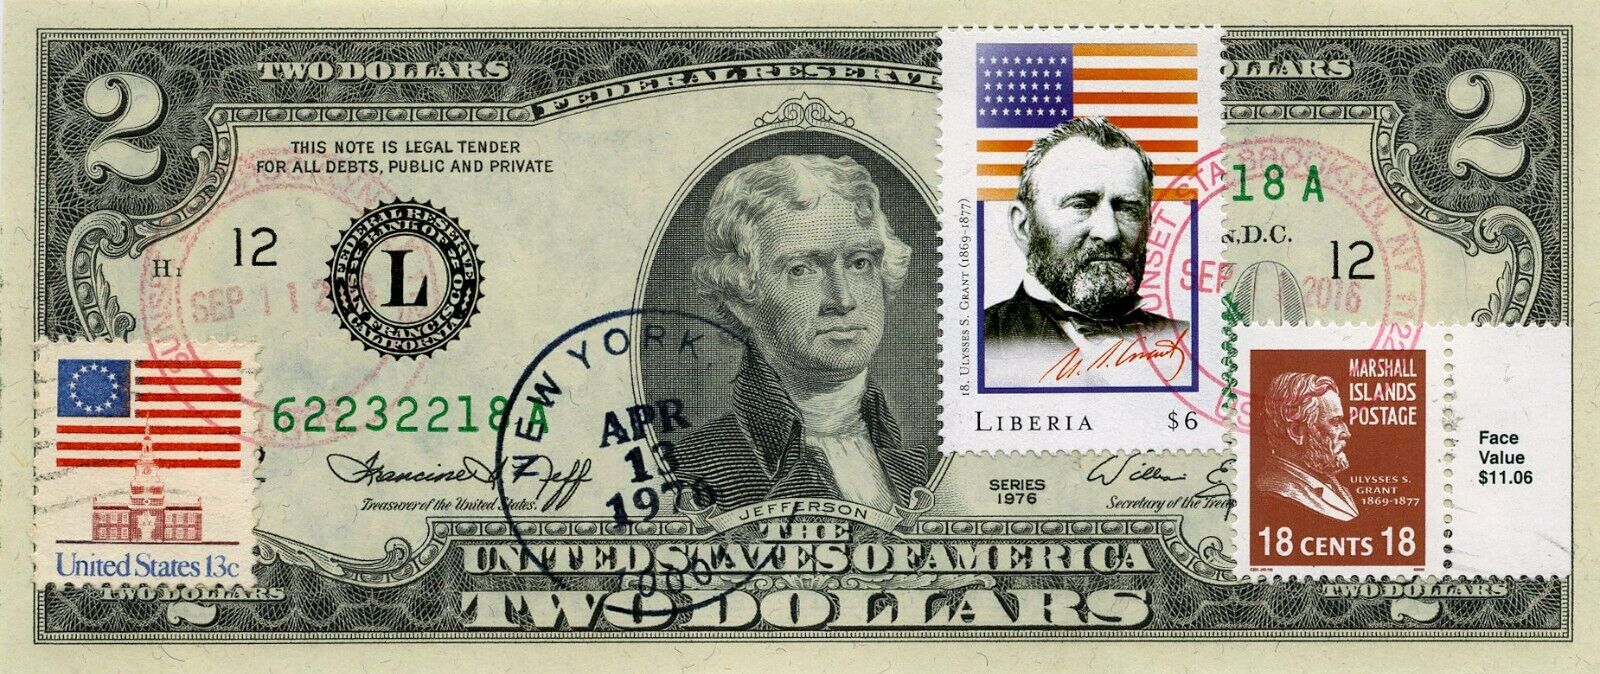 MAGNET $2 1976 POST STAMP ULYSSES S. GRANT 18th PRESIDENT OF THE UNITED STATES